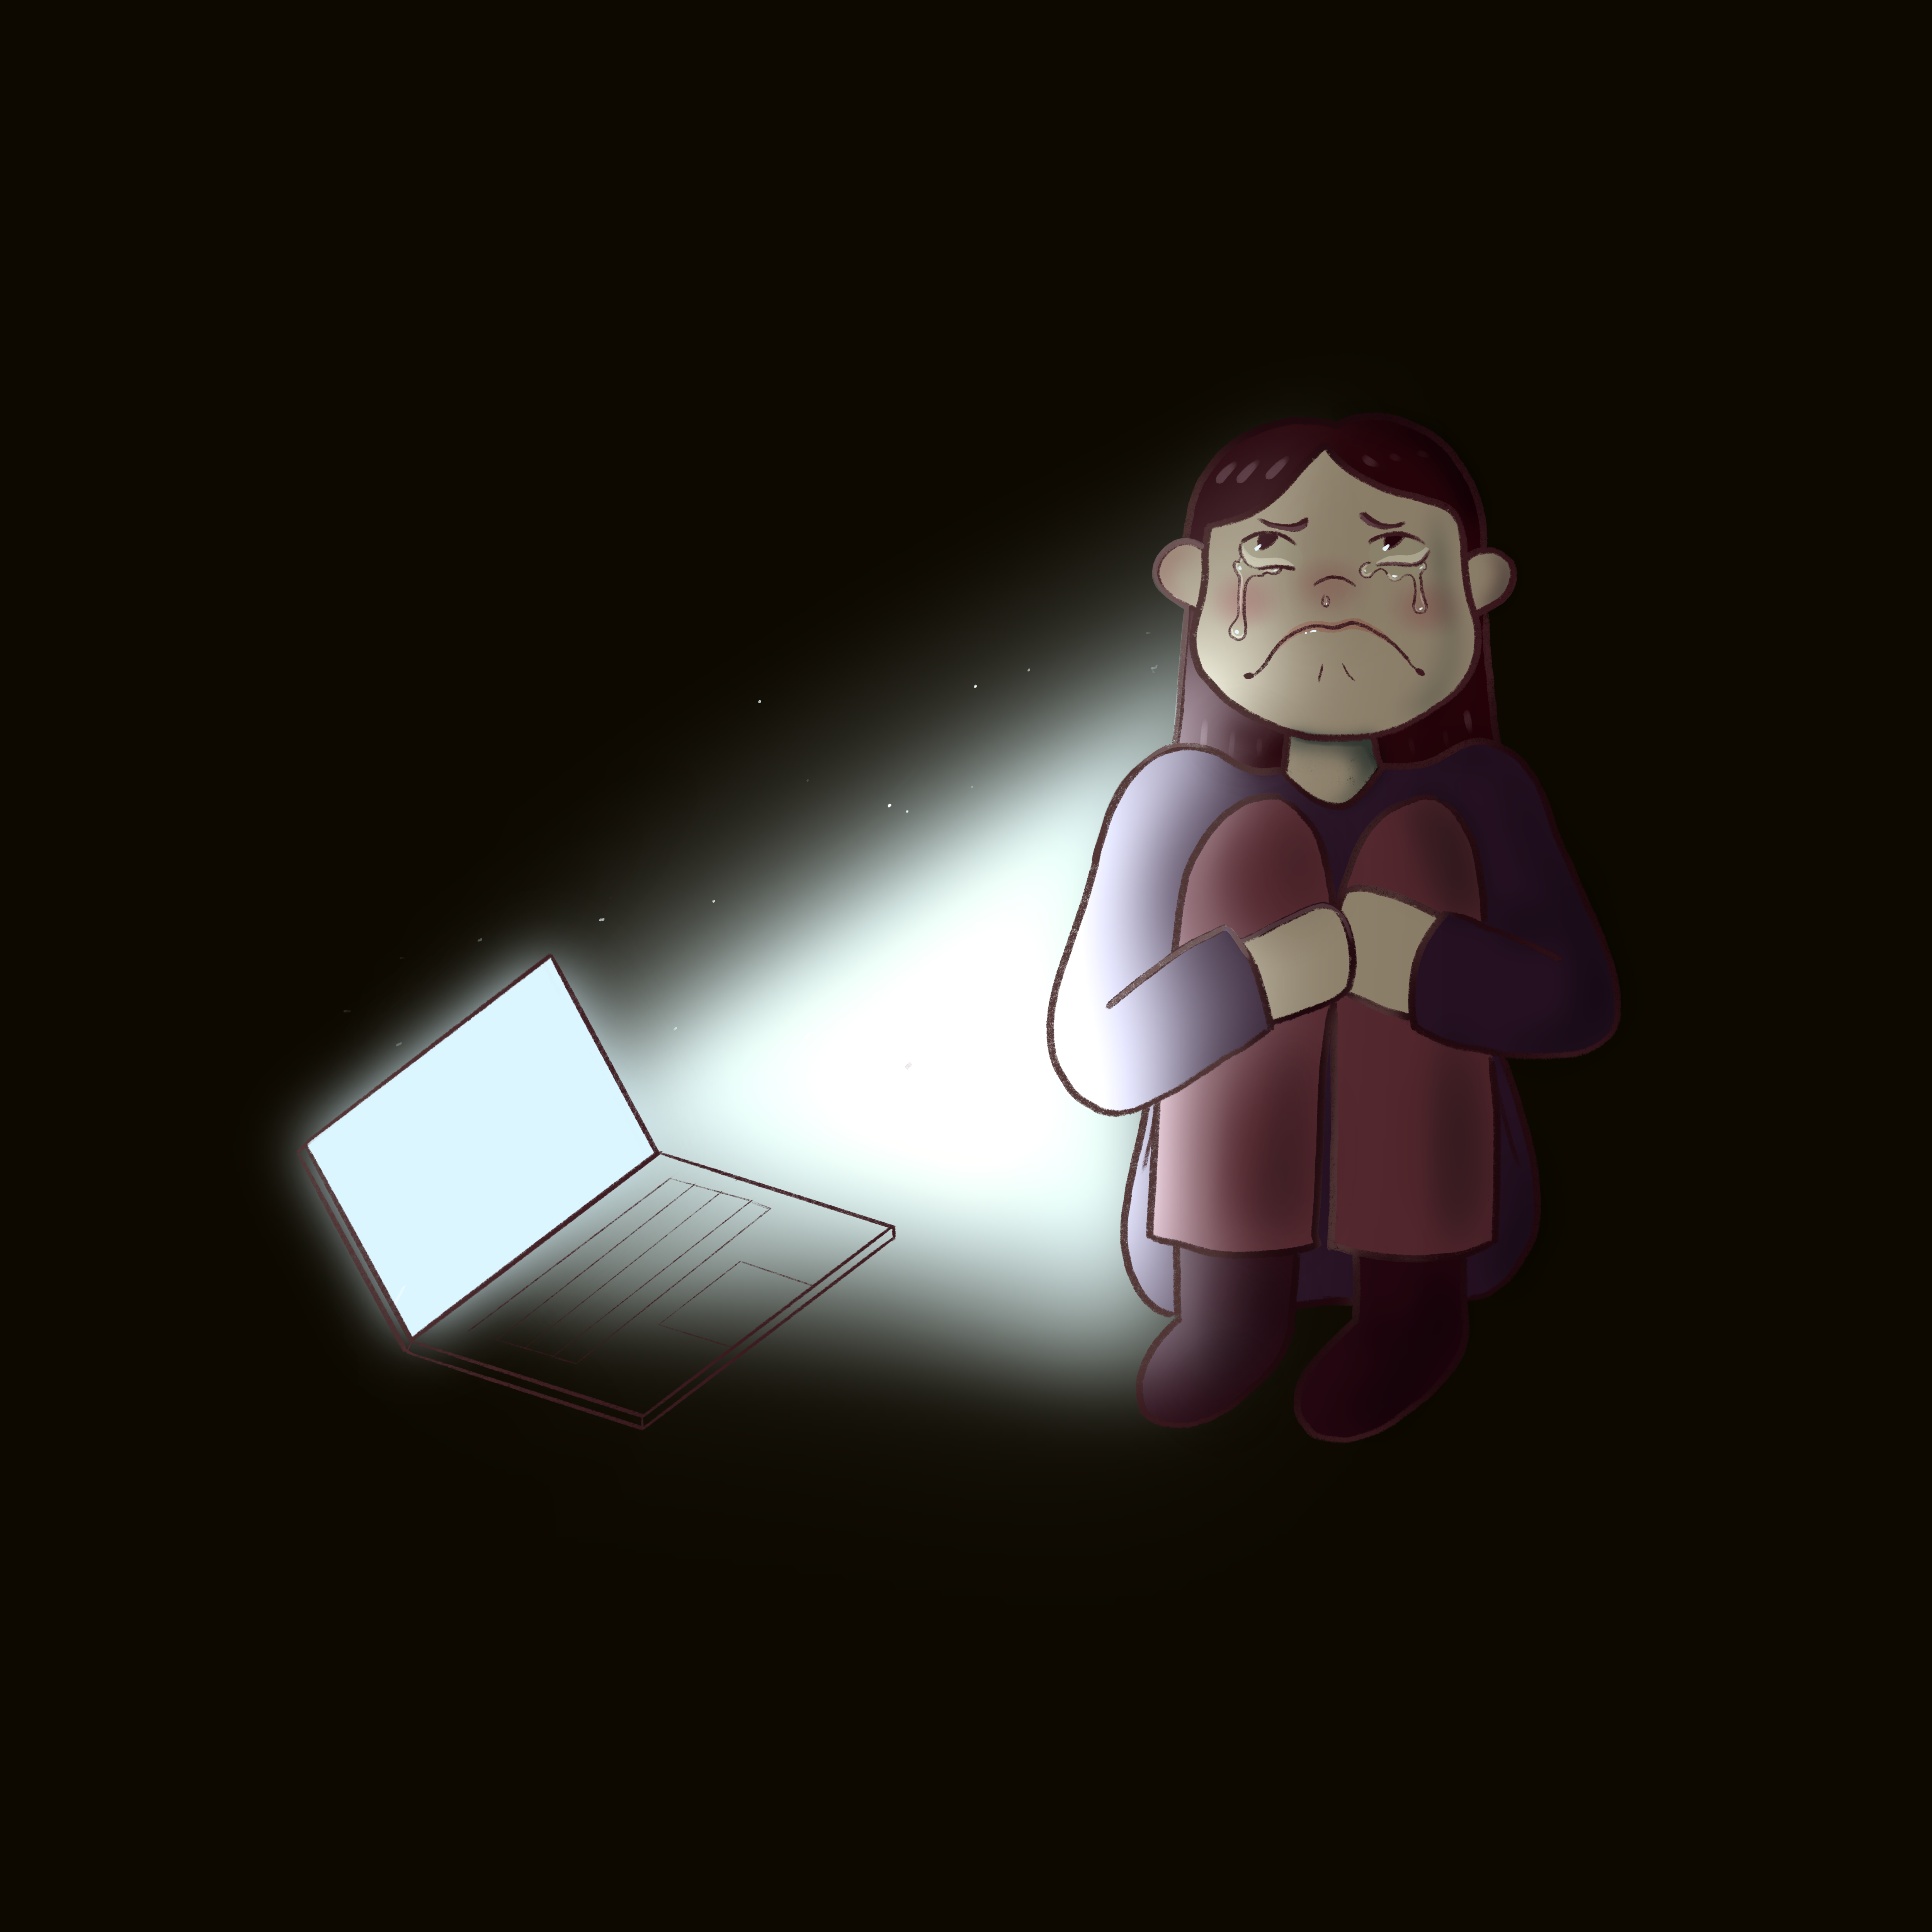 A person with tears down their face. They're sitting in a dark room lit with the glow of a computer screen. The computer/laptop screen can be seen in the foreground.